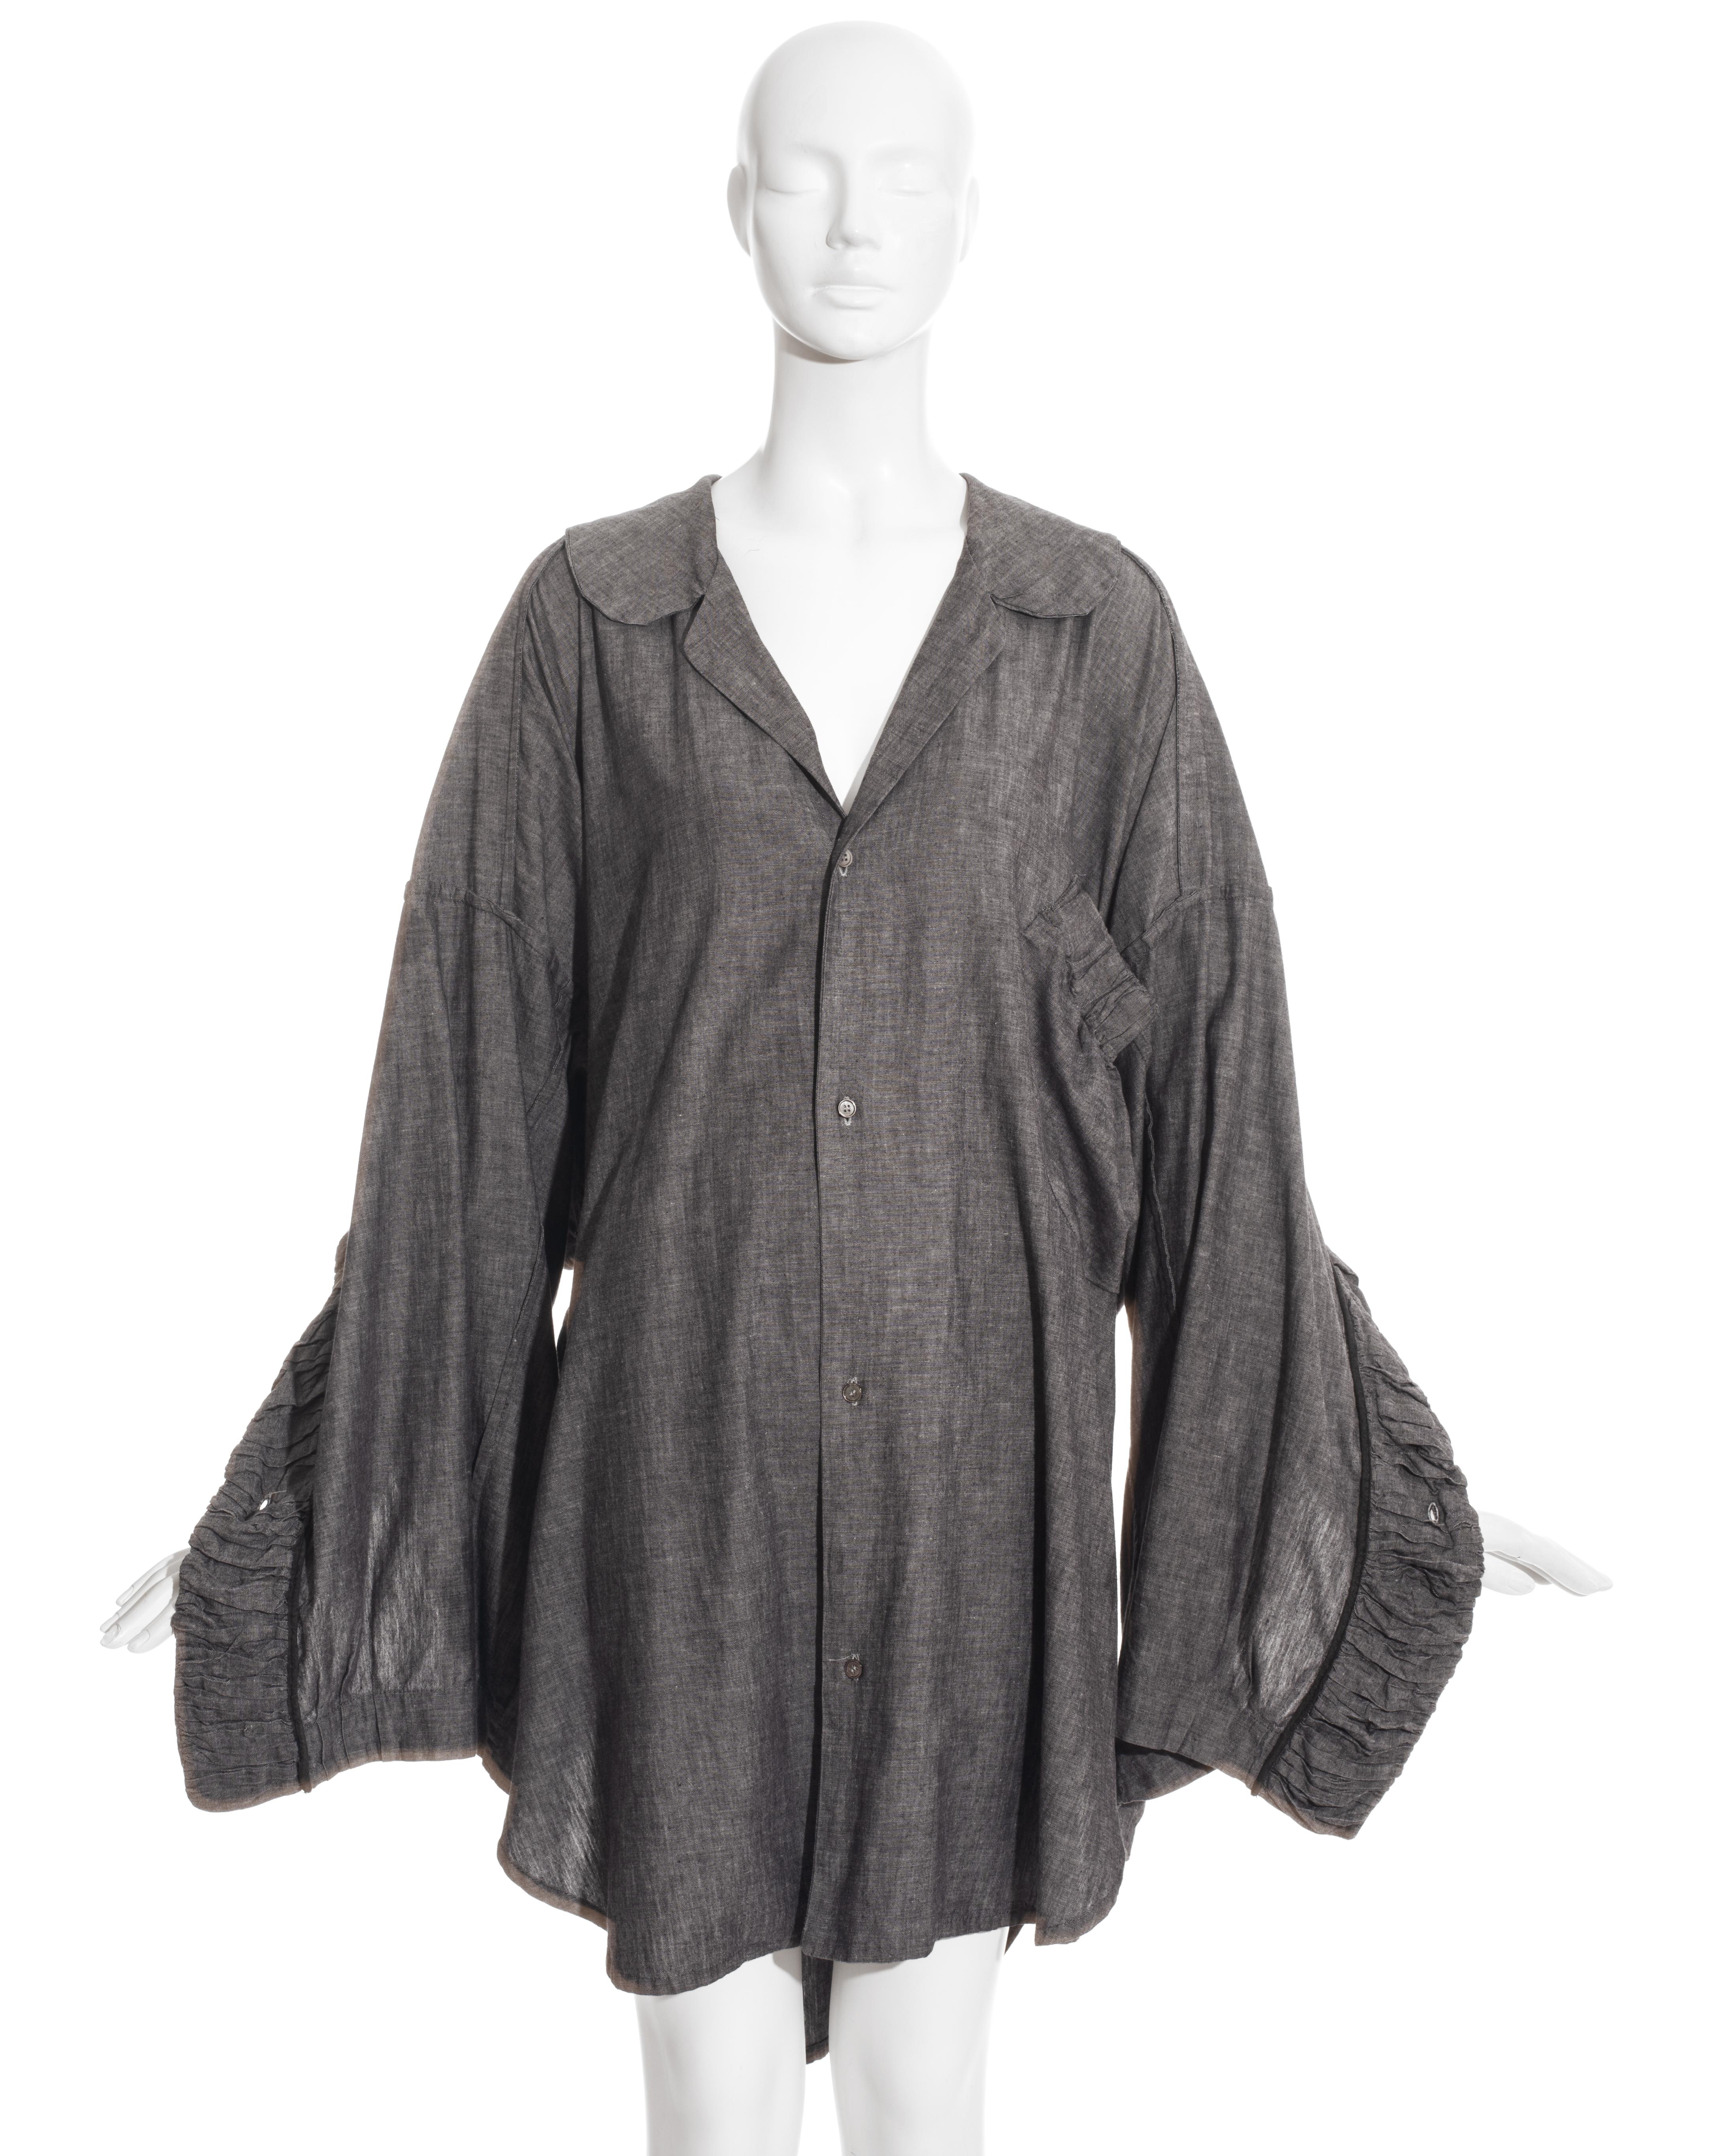 John Galliano grey linen oversized button-up shirt, ss 1985 In Excellent Condition For Sale In London, GB